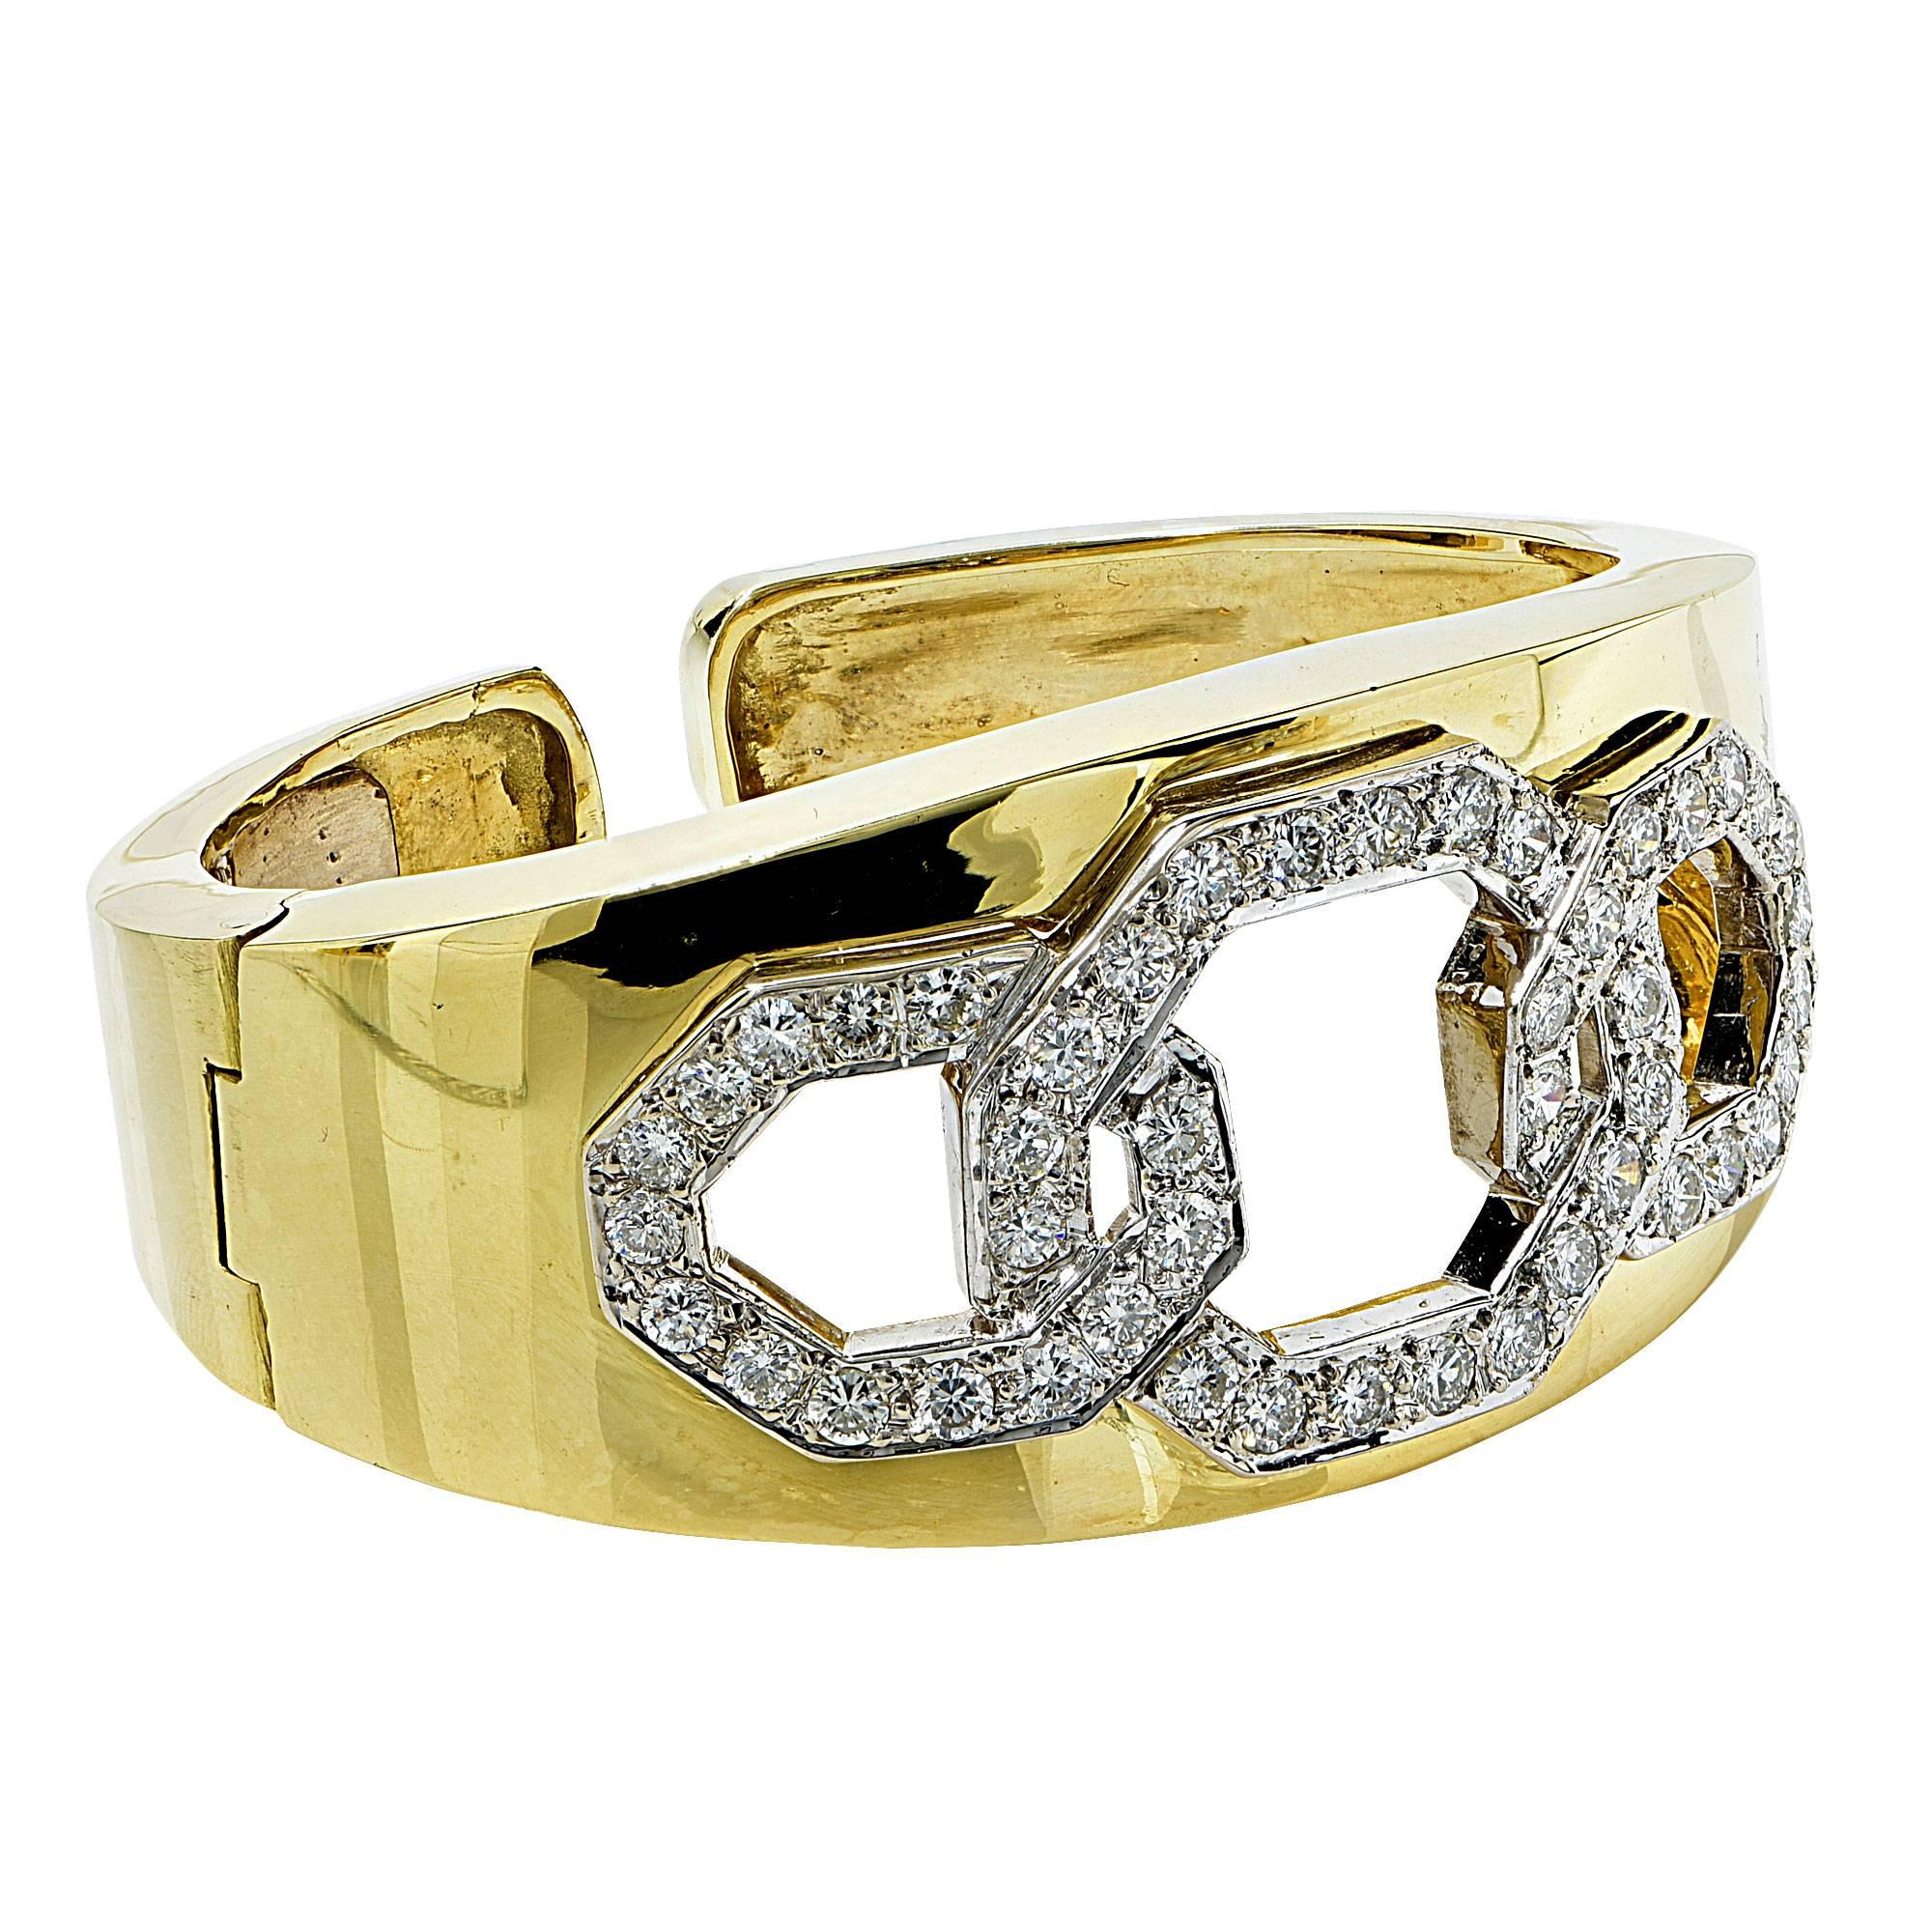 18k Yellow Gold Bangle containing 46 round brilliant cut diamonds weighing approximately 5cts F-G color and VS clarity.

Metal weight: 80.16 grams

This diamond bracelet is accompanied by a retail appraisal performed by a GIA Graduate Gemologist.